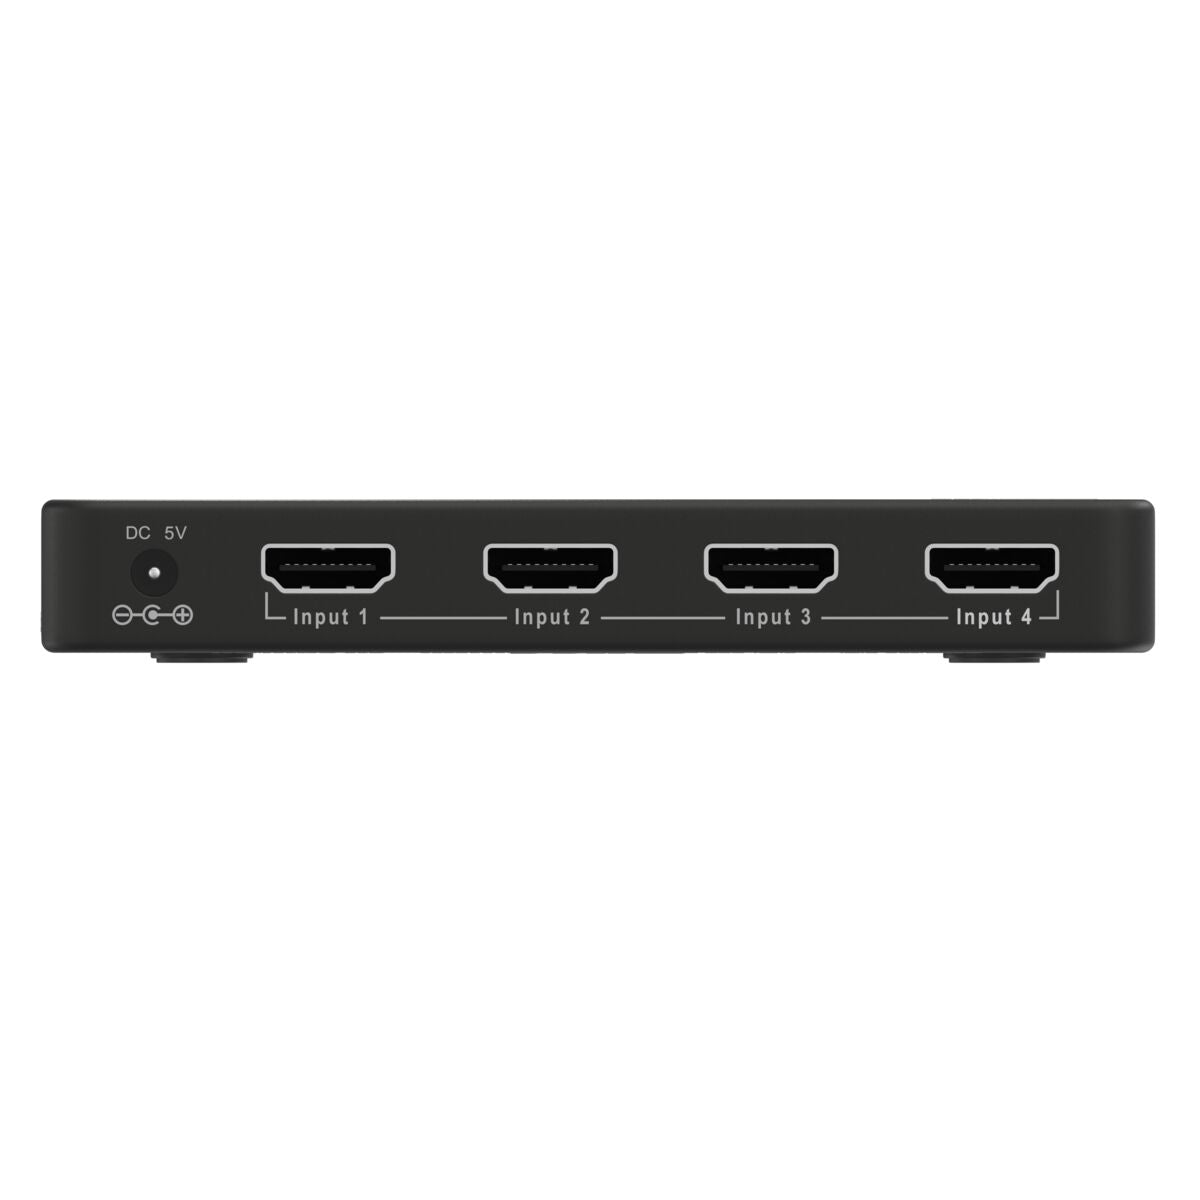 Connect 740 - HDMI switch 4K 120Hz, 8K 60Hz - 4 in / 1 out - Connections Image - 4 HDMI in and DC power | Marmitek